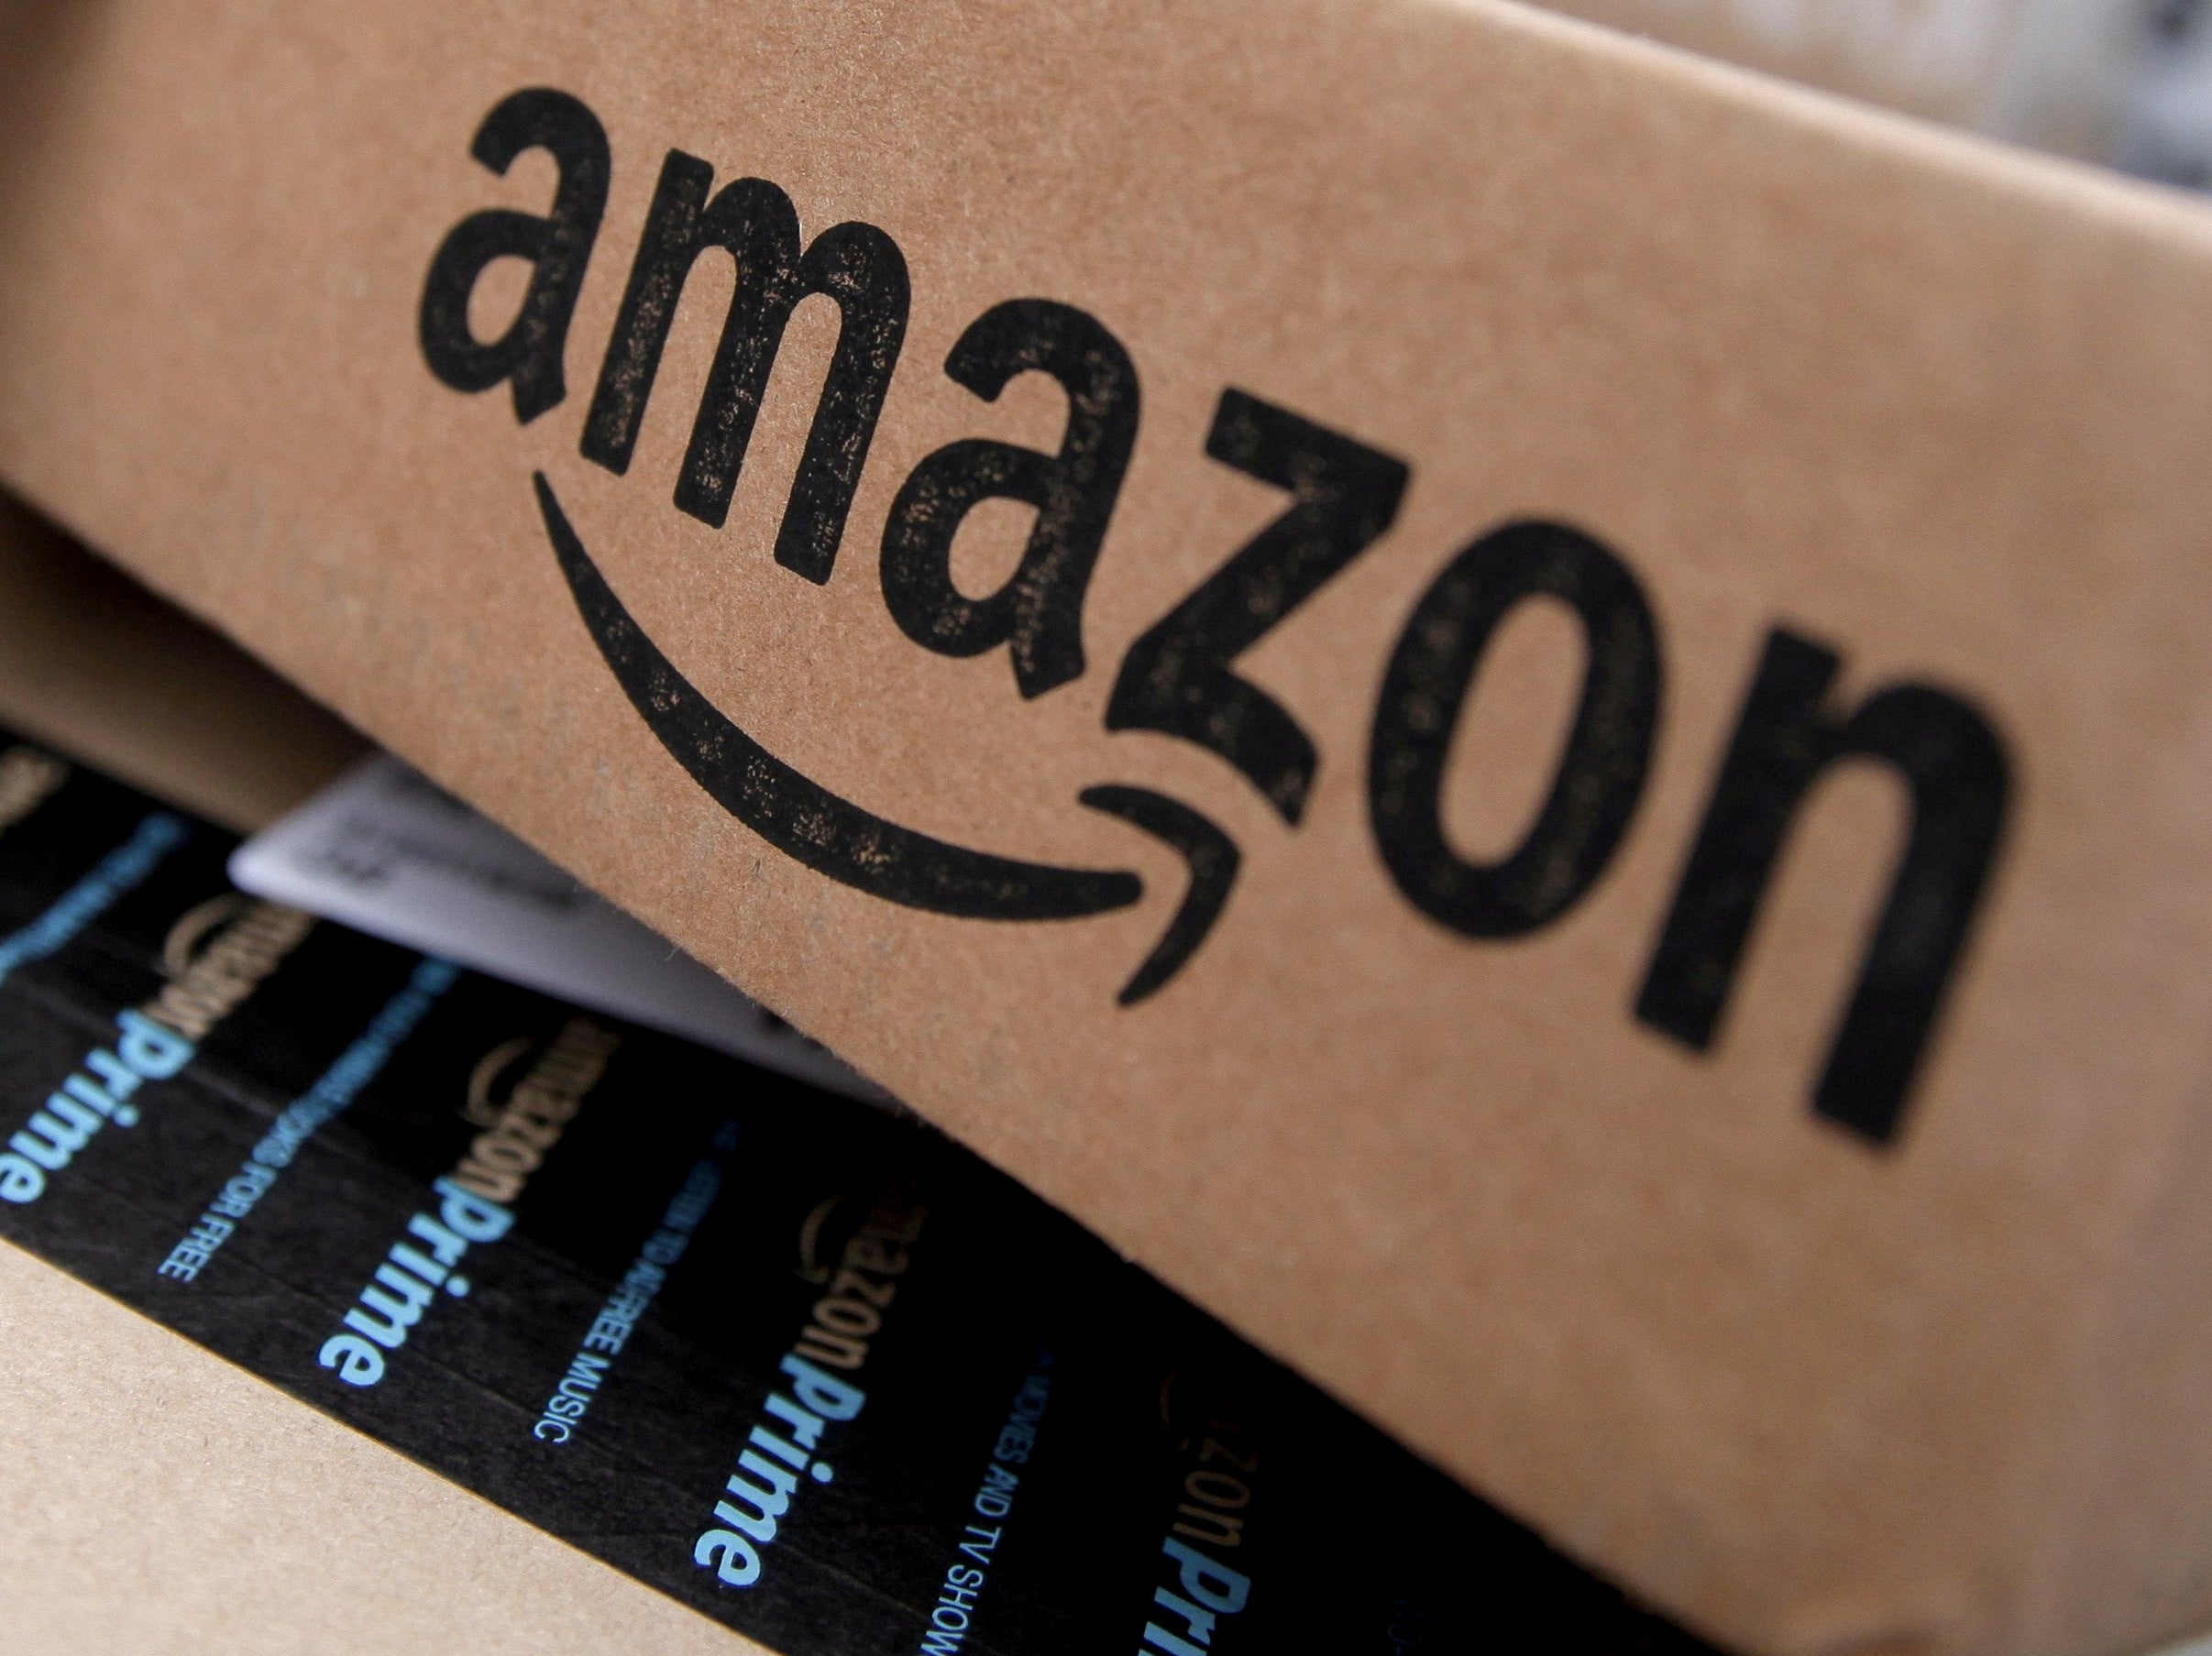 <p>The fight against Amazon is not one the consumer, even the informed consumer, can manage</p>